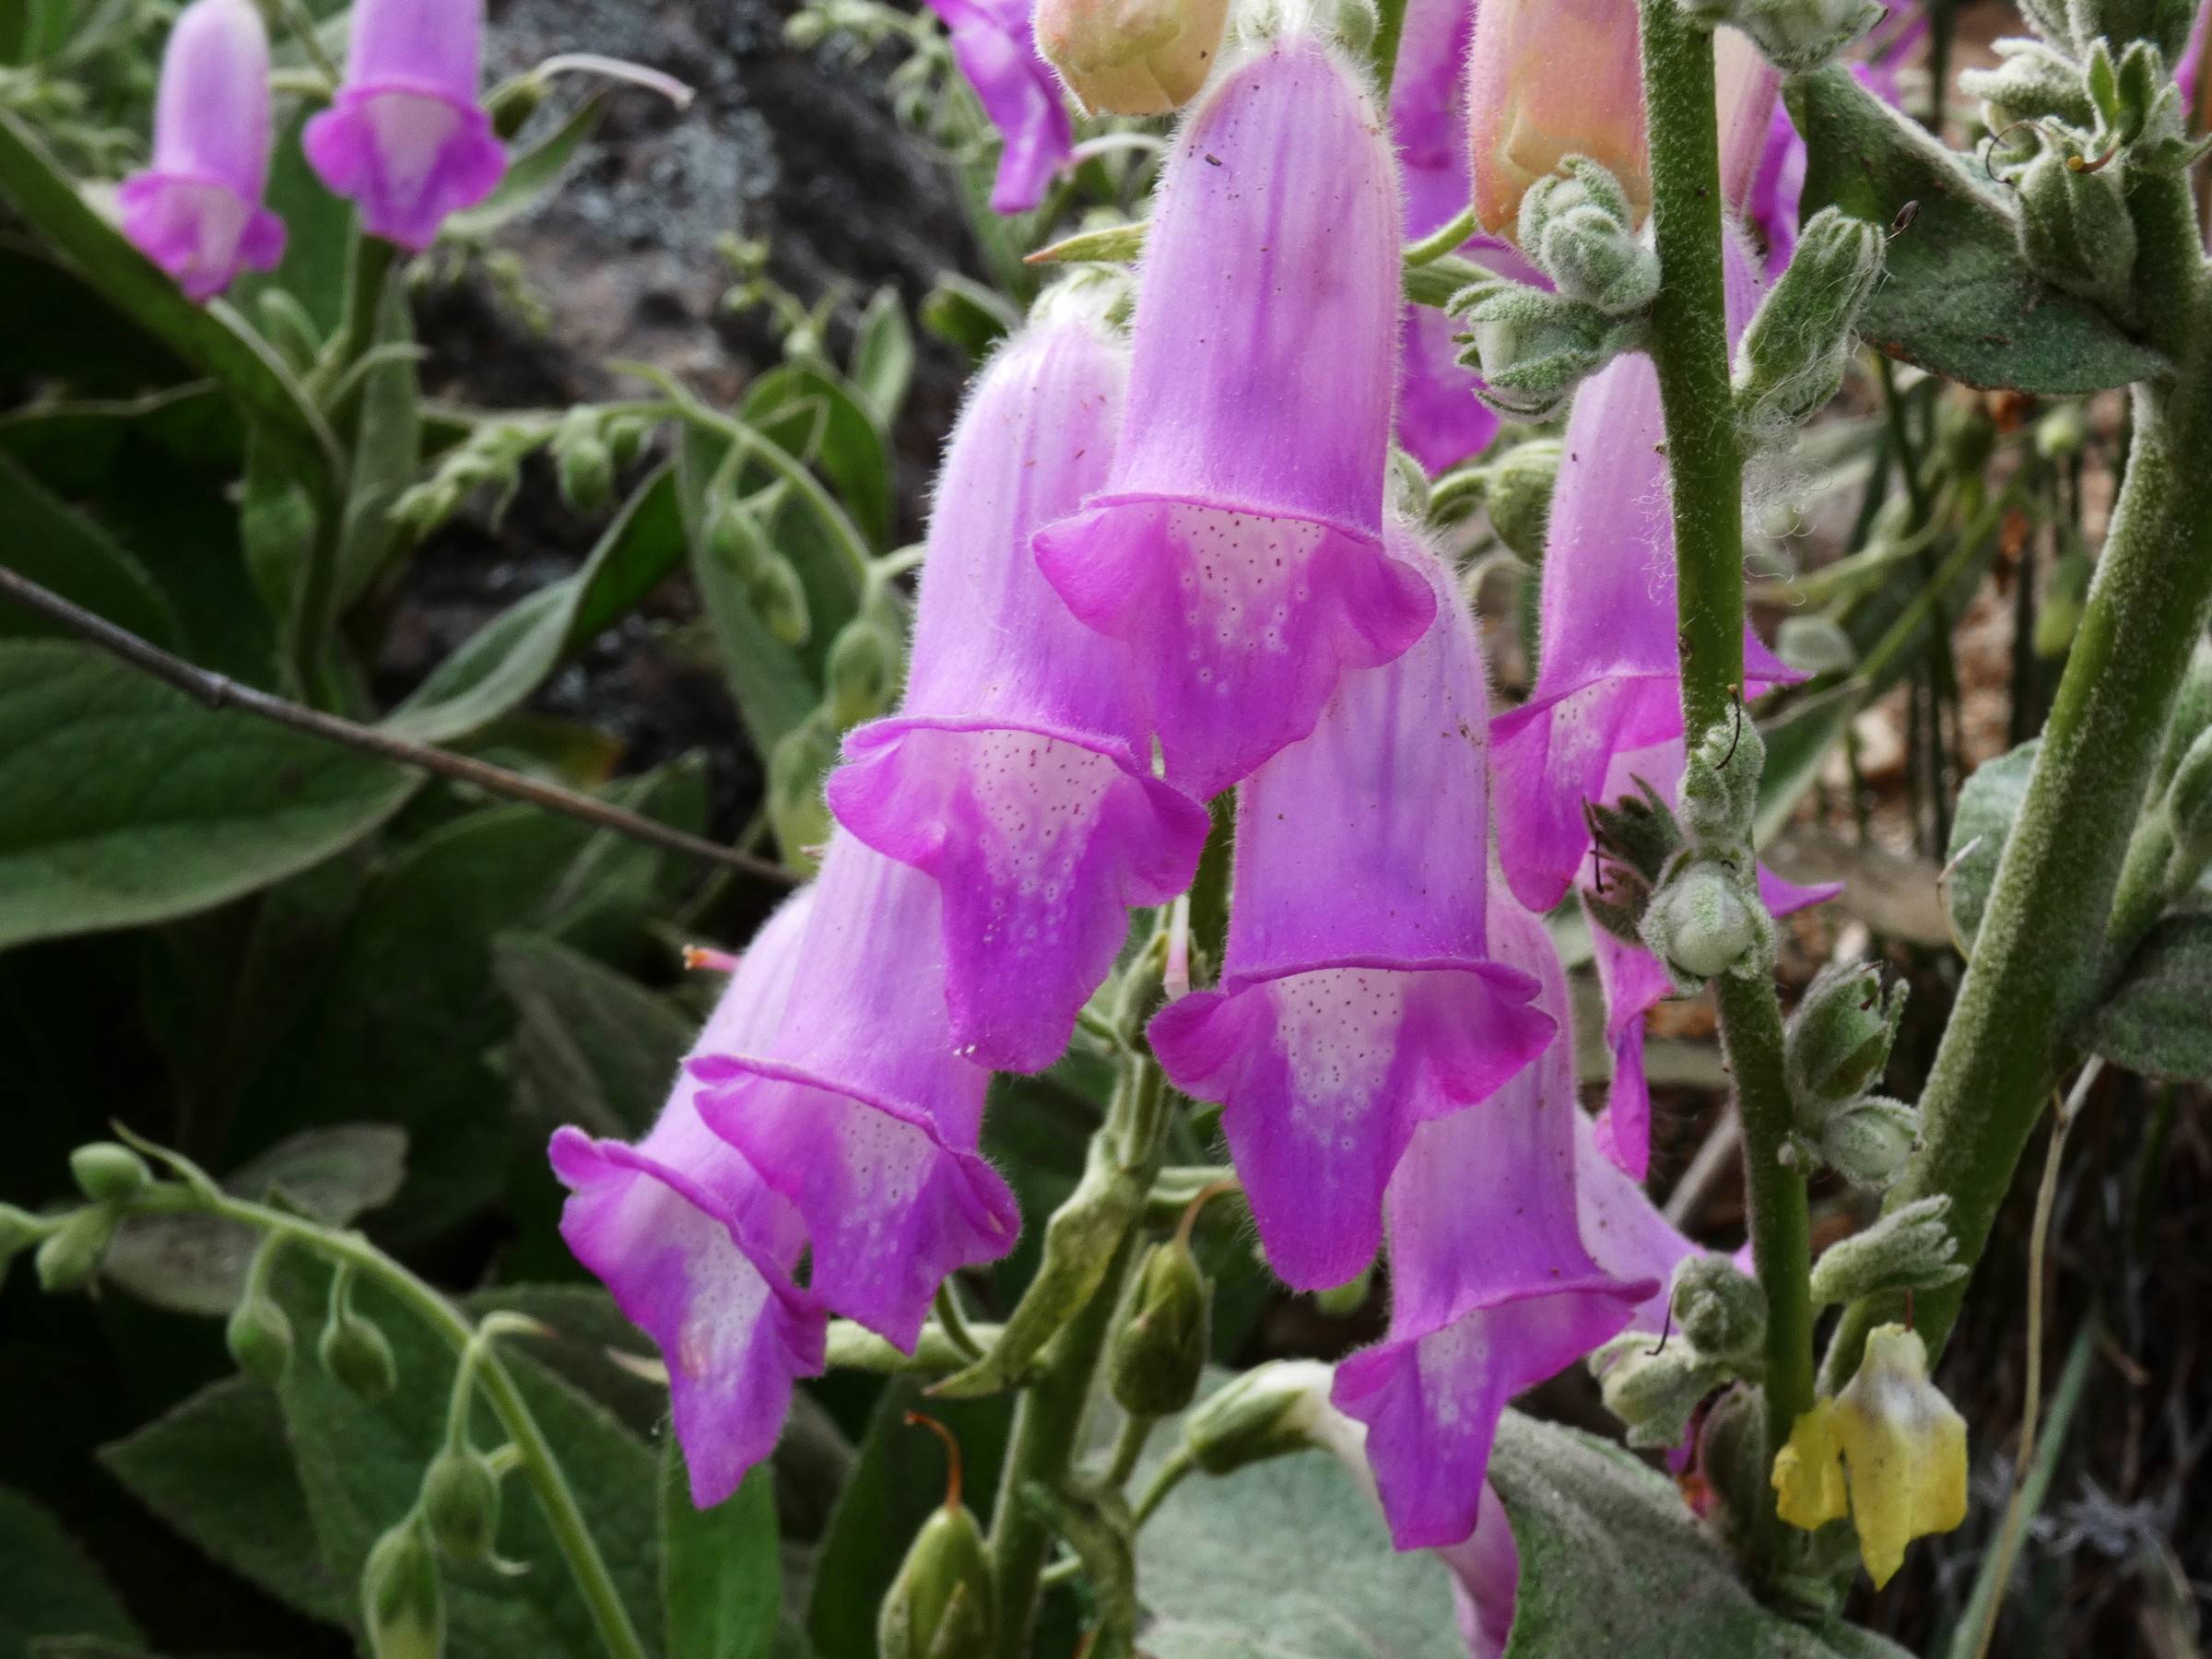 purple, feathery, bell-shaped flowers with green, hairy sepals and stems